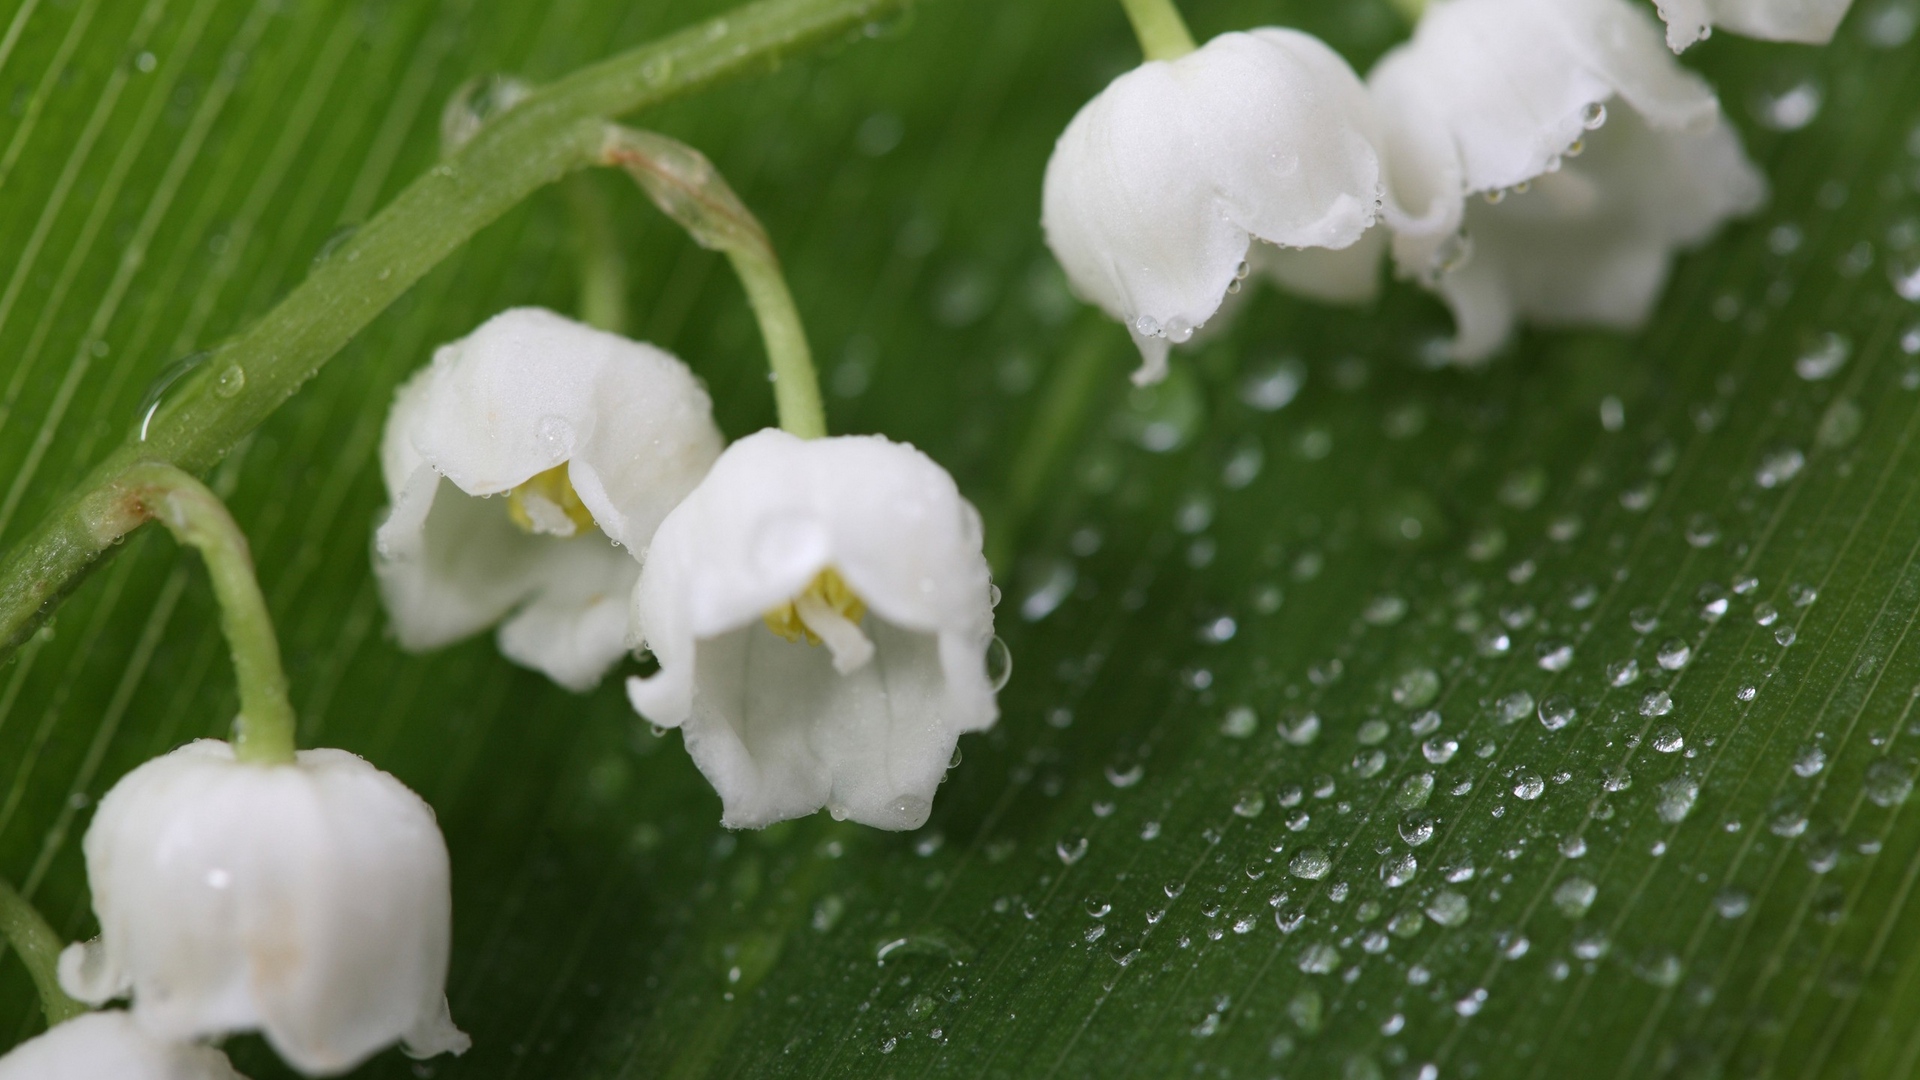 Close Up Of Lily Of The Valley And Dew Drops - Dew On Lily Of The Valley - HD Wallpaper 